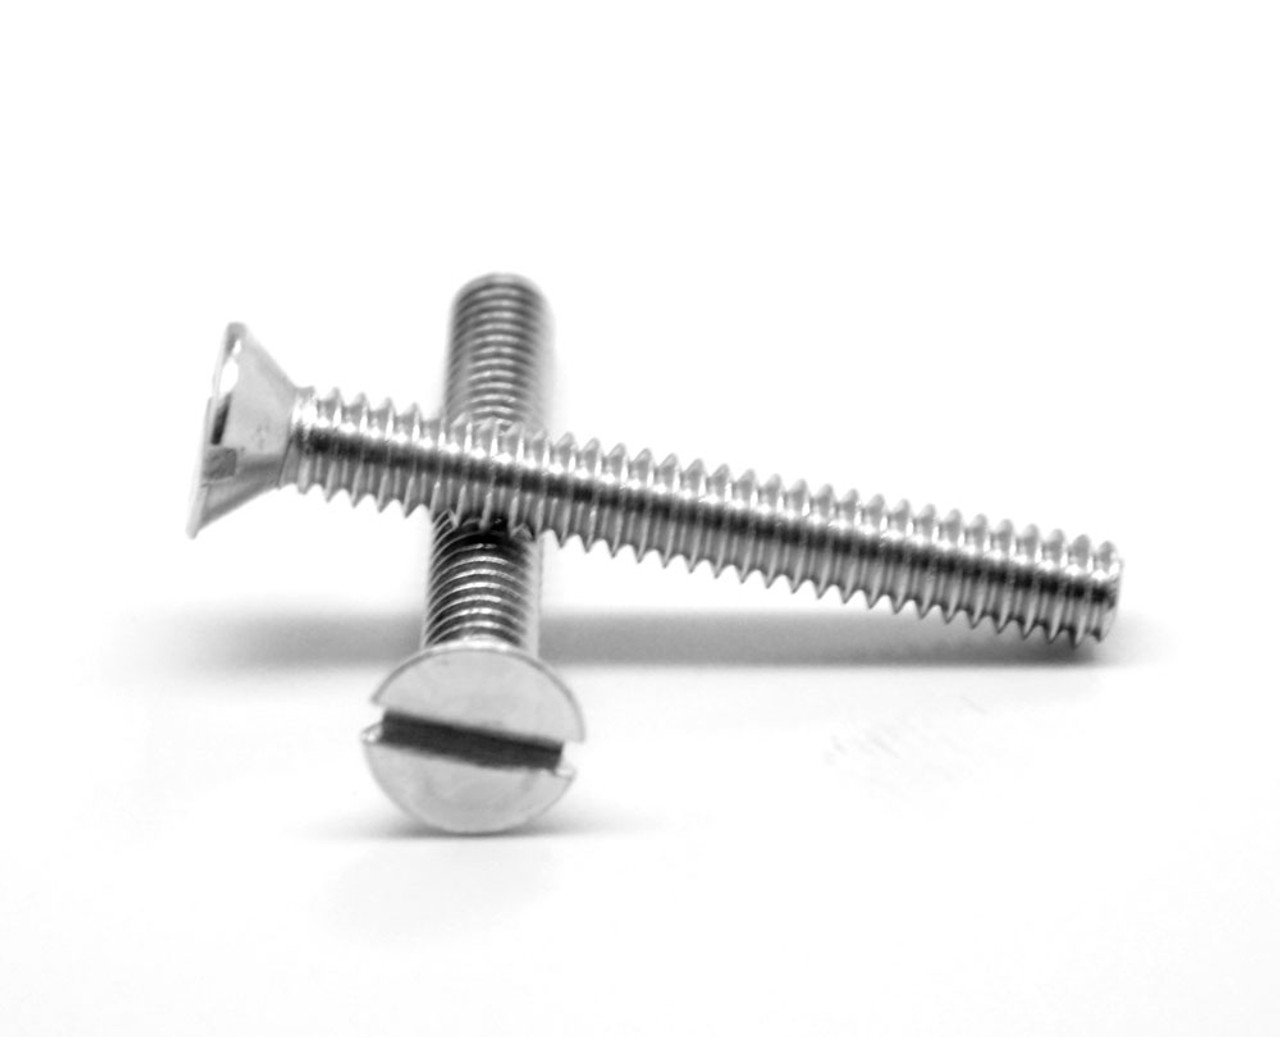 #10-32 x 9/16" (FT) Fine Thread Machine Screw Slotted Flat Head Stainless Steel 18-8